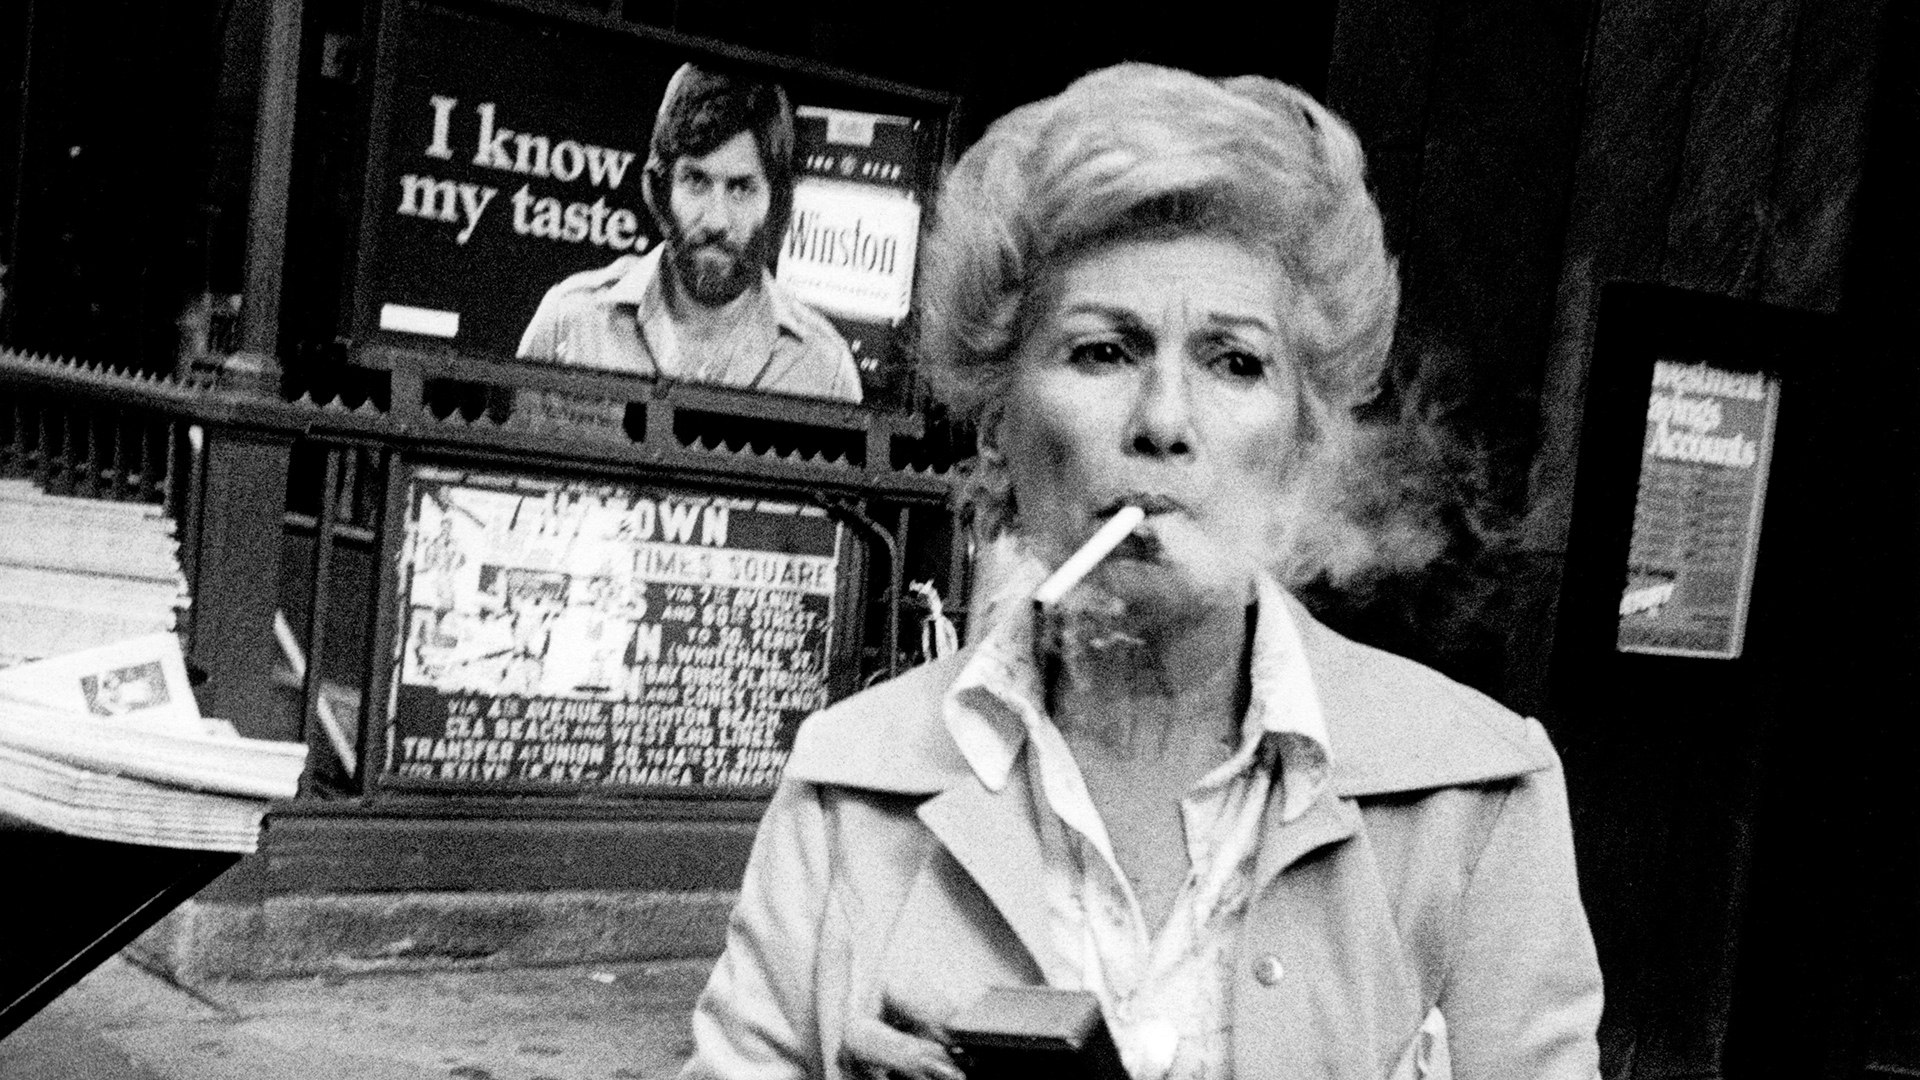 Out of the Cool: The New York Street Photographs of Godlis